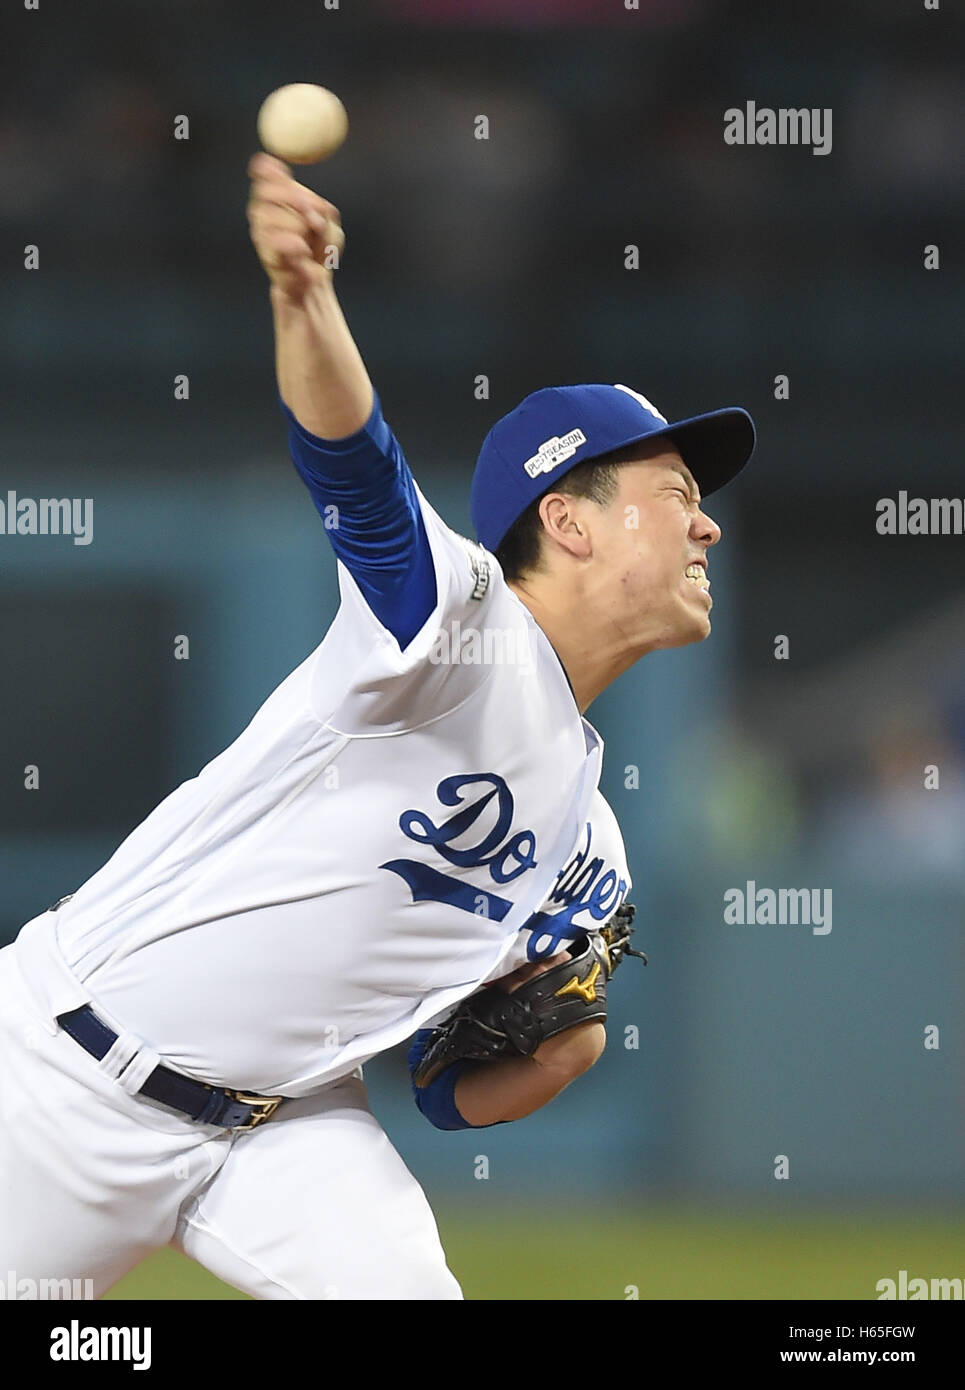 Los Angeles, CA. 20th Oct, 2016. Kenta Maeda (Dodgers) MLB : Kenta Maeda of the Los Angeles Dodgers pitches during the game five of the National League Championship Series against the Chicago Cubs on October 20, 2016, at Dodger Stadium in Los Angeles, CA . © AFLO/Alamy Live News Stock Photo